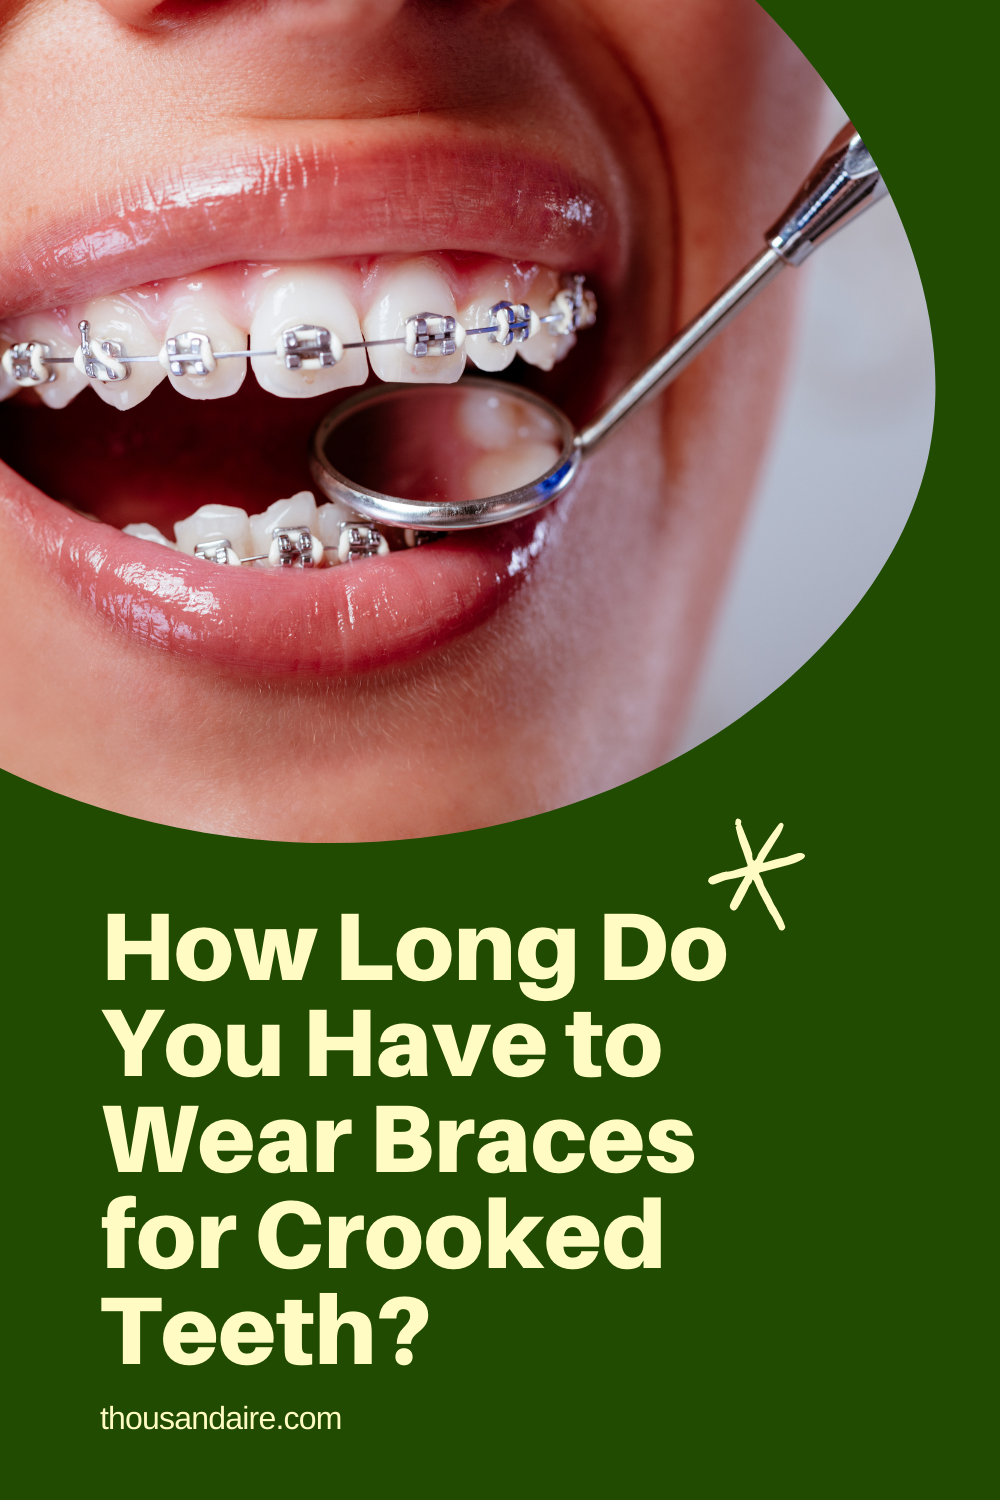 How Long Do You Have to Wear Braces for Crooked Teeth